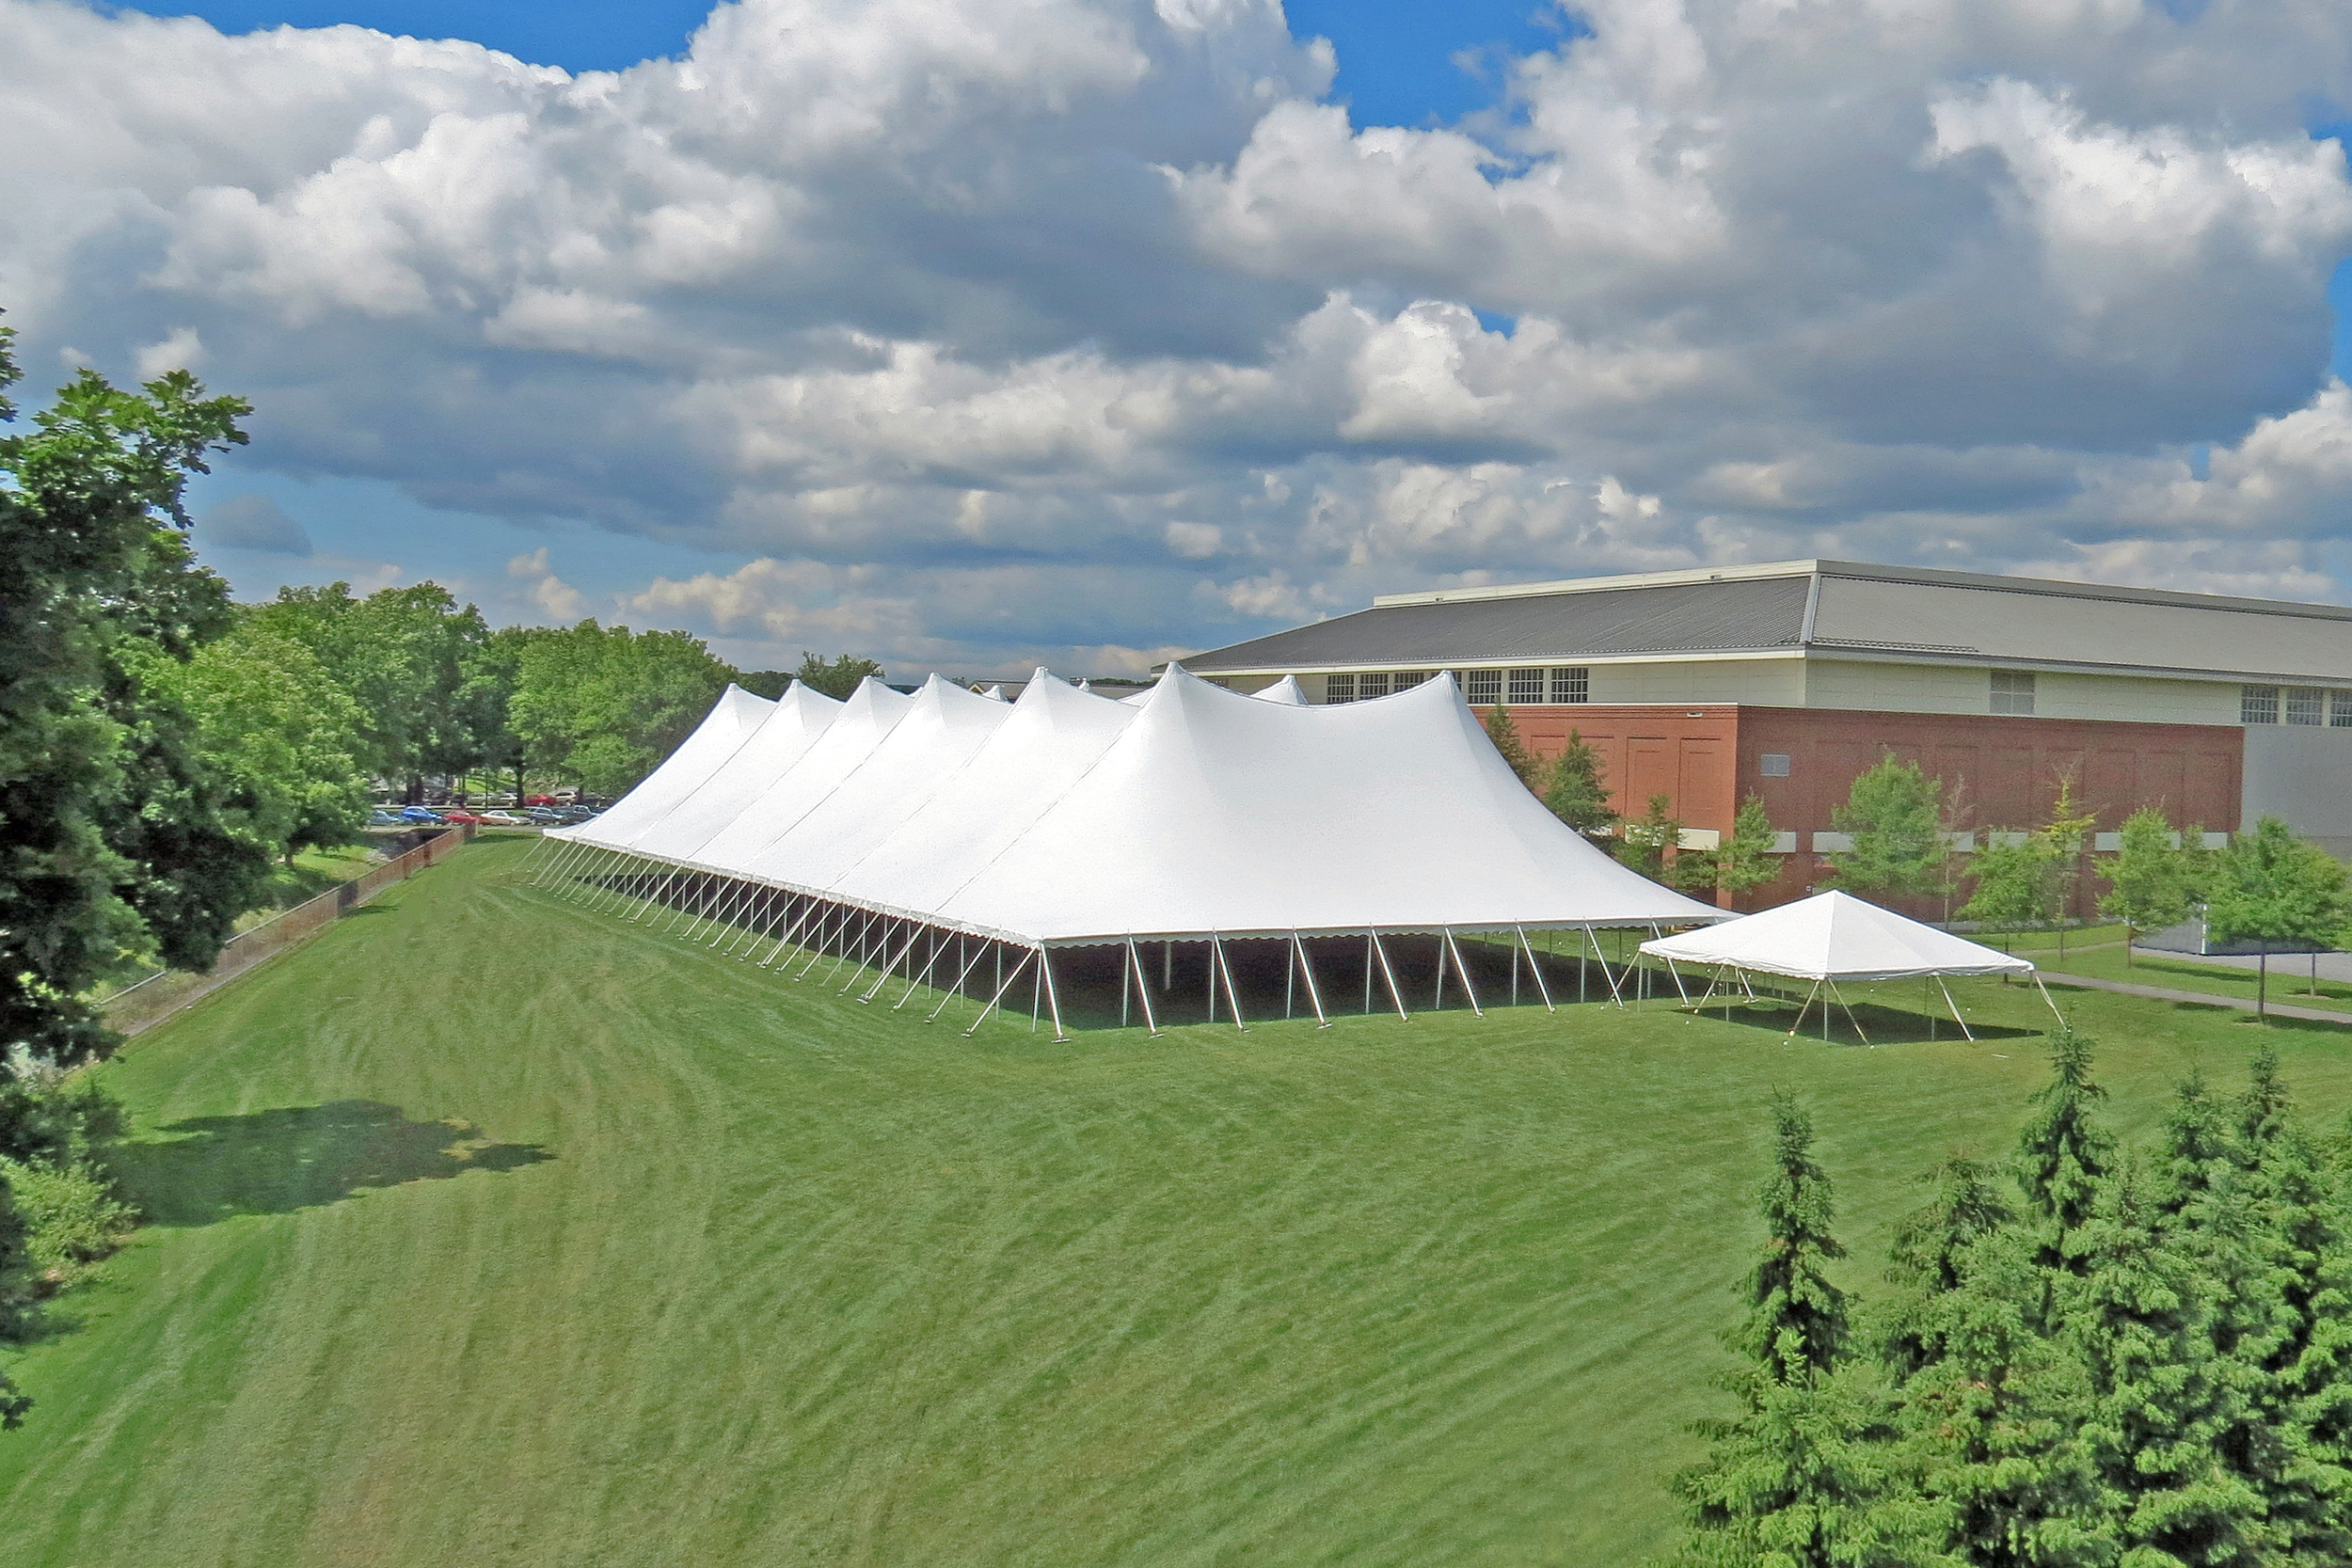 Tents available for immediate rental